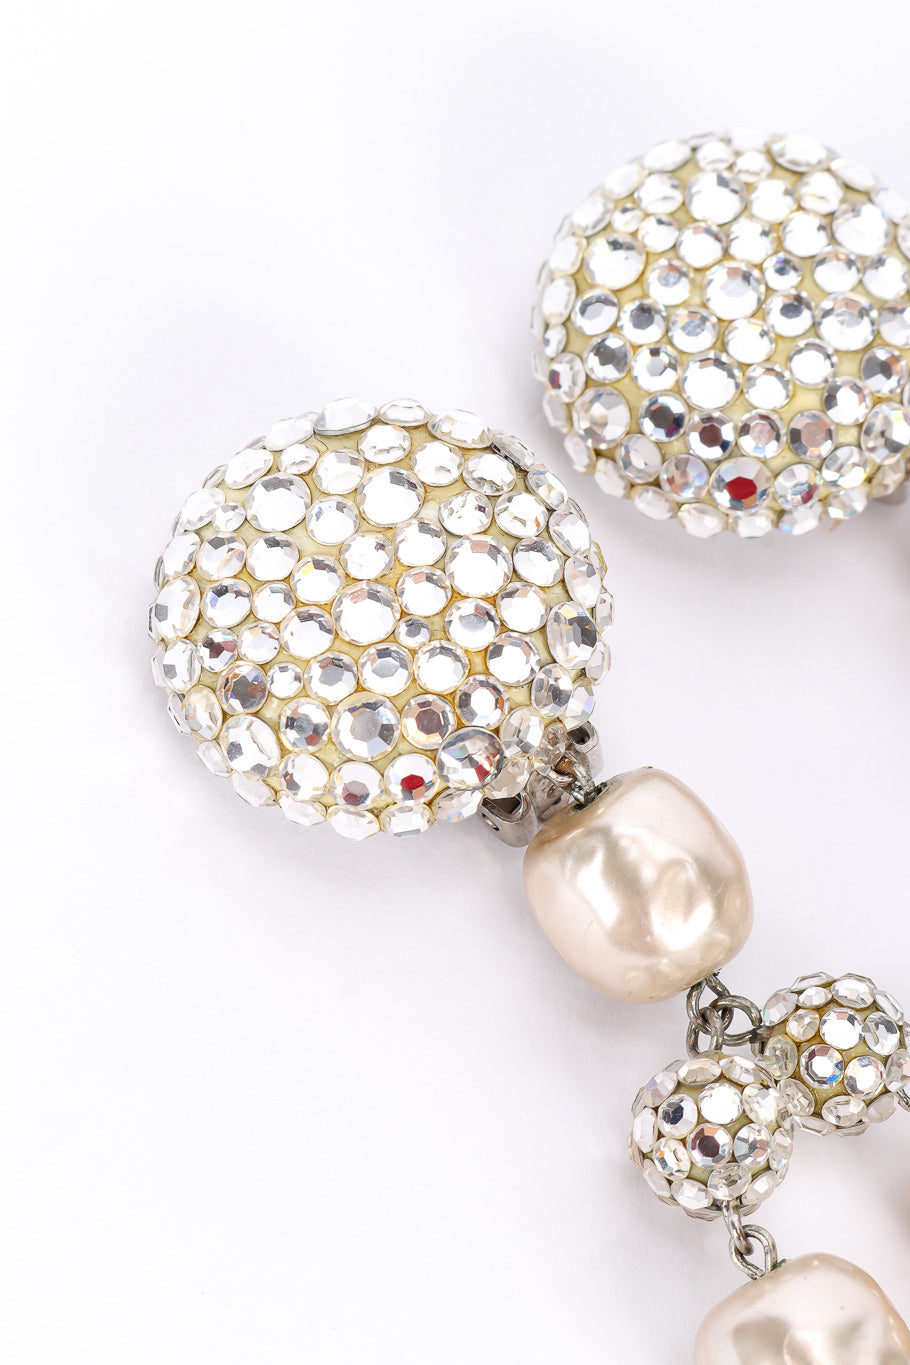 Pearl drop earrings by James Arpad on white background tops @recessla